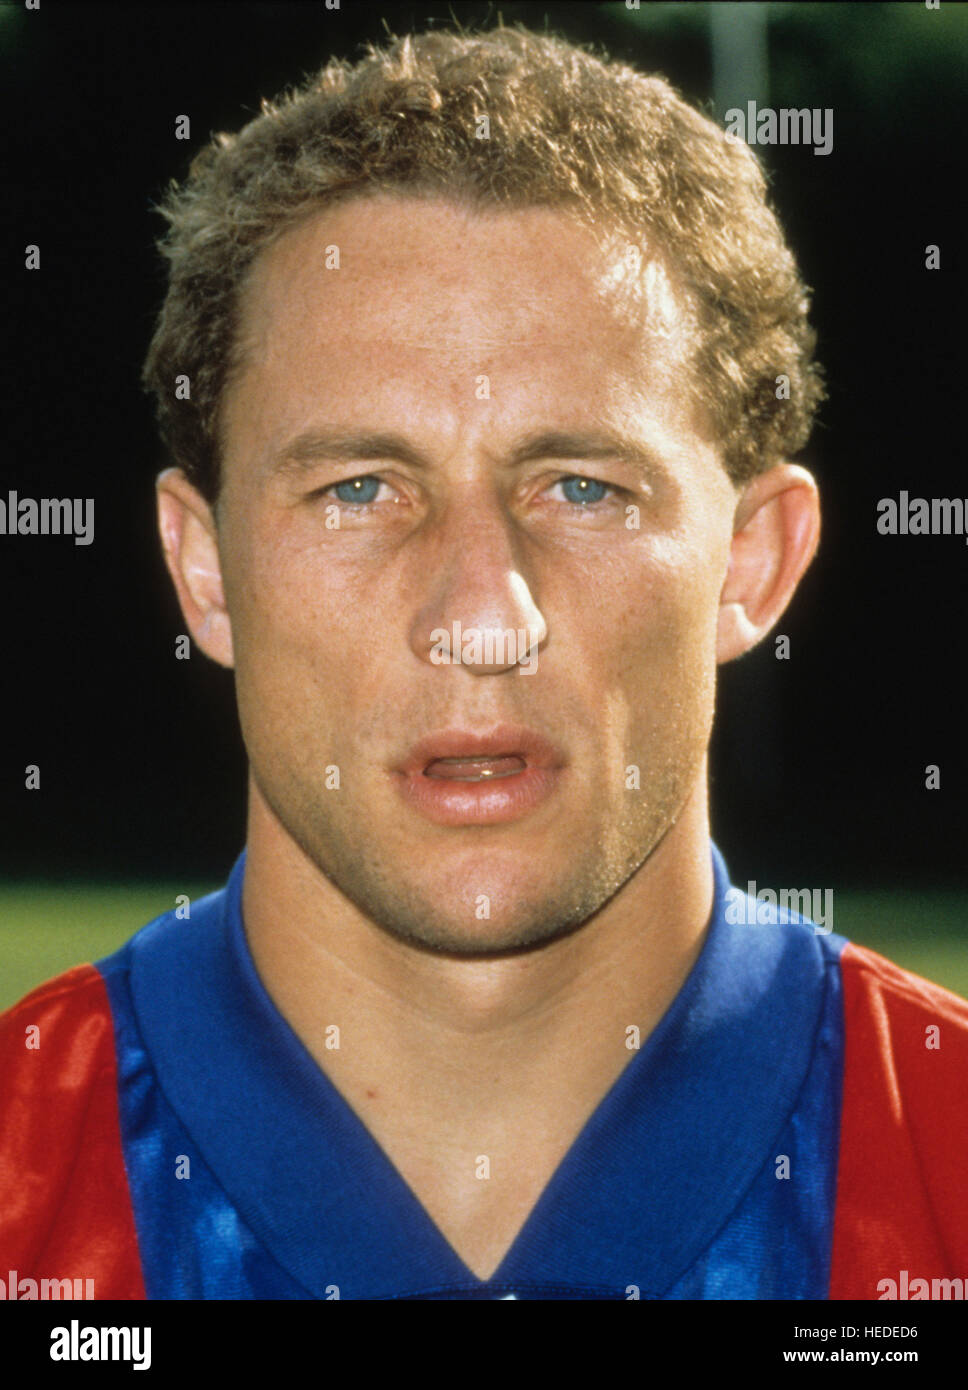 JEAN PIERRE PAPIN French football player 1992 to European championship  Stock Photo - Alamy